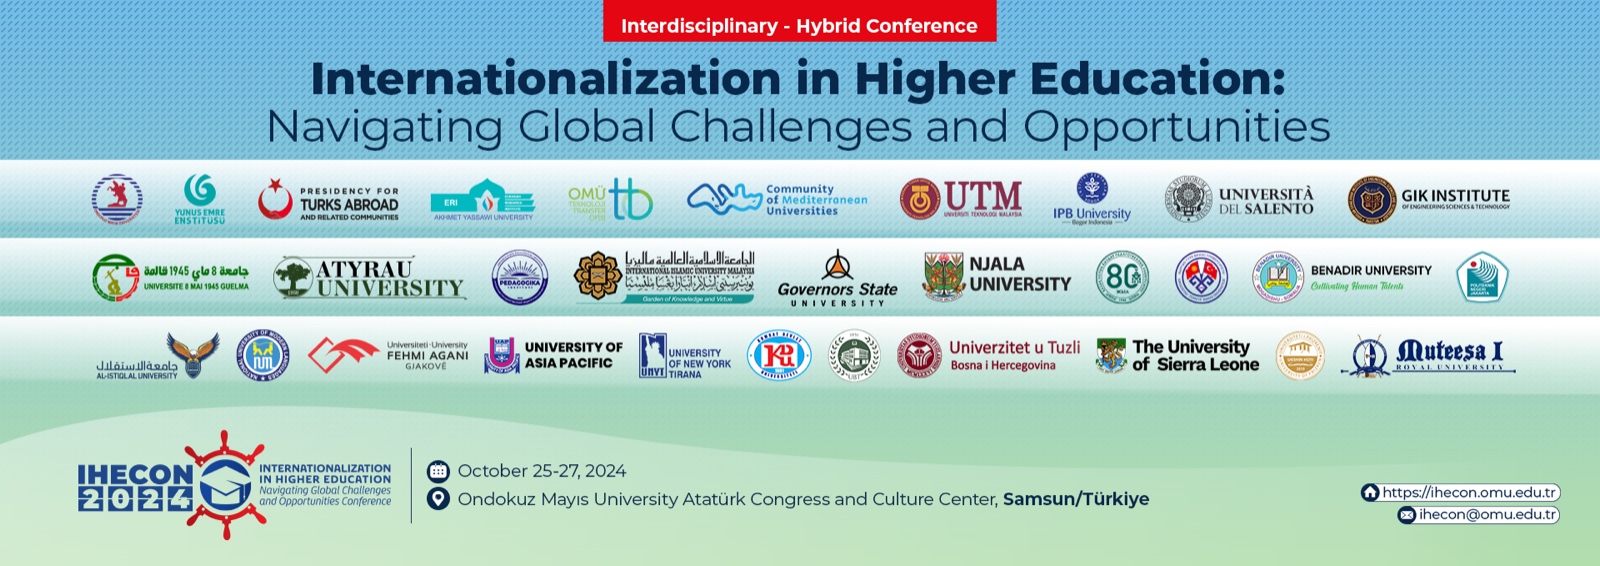 Internationalization in Higher Education: Navigating Global Challenges and Opportunities Conference (IHECON2024) 